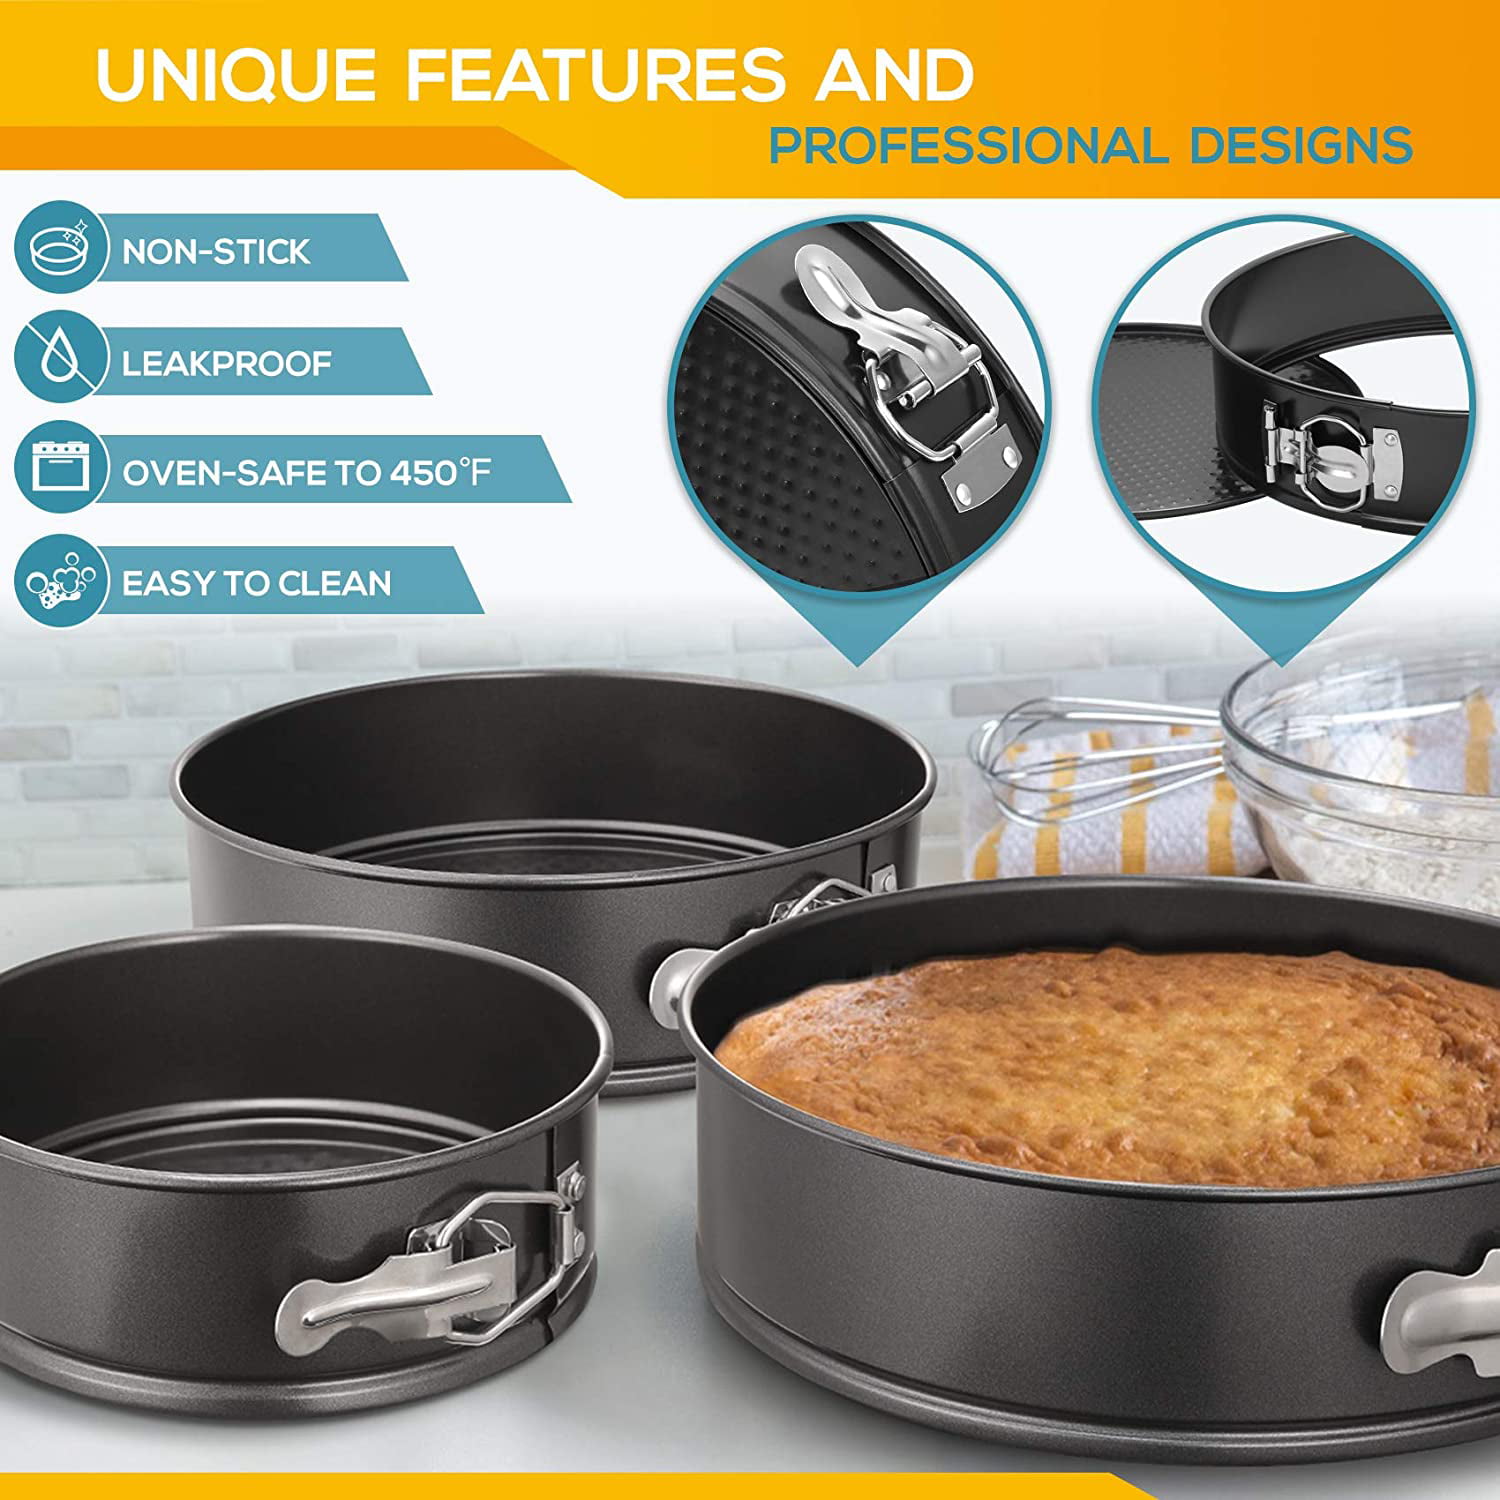 Stainless Steel Springform Pan Set,7910 Nonstick Leakproof Baking Cake Pan  Set,Round Bakeware Cheesecake Pan with Removable Bottoms and 20pcs  Parchment Paper Liners for Instant Pot and Oven